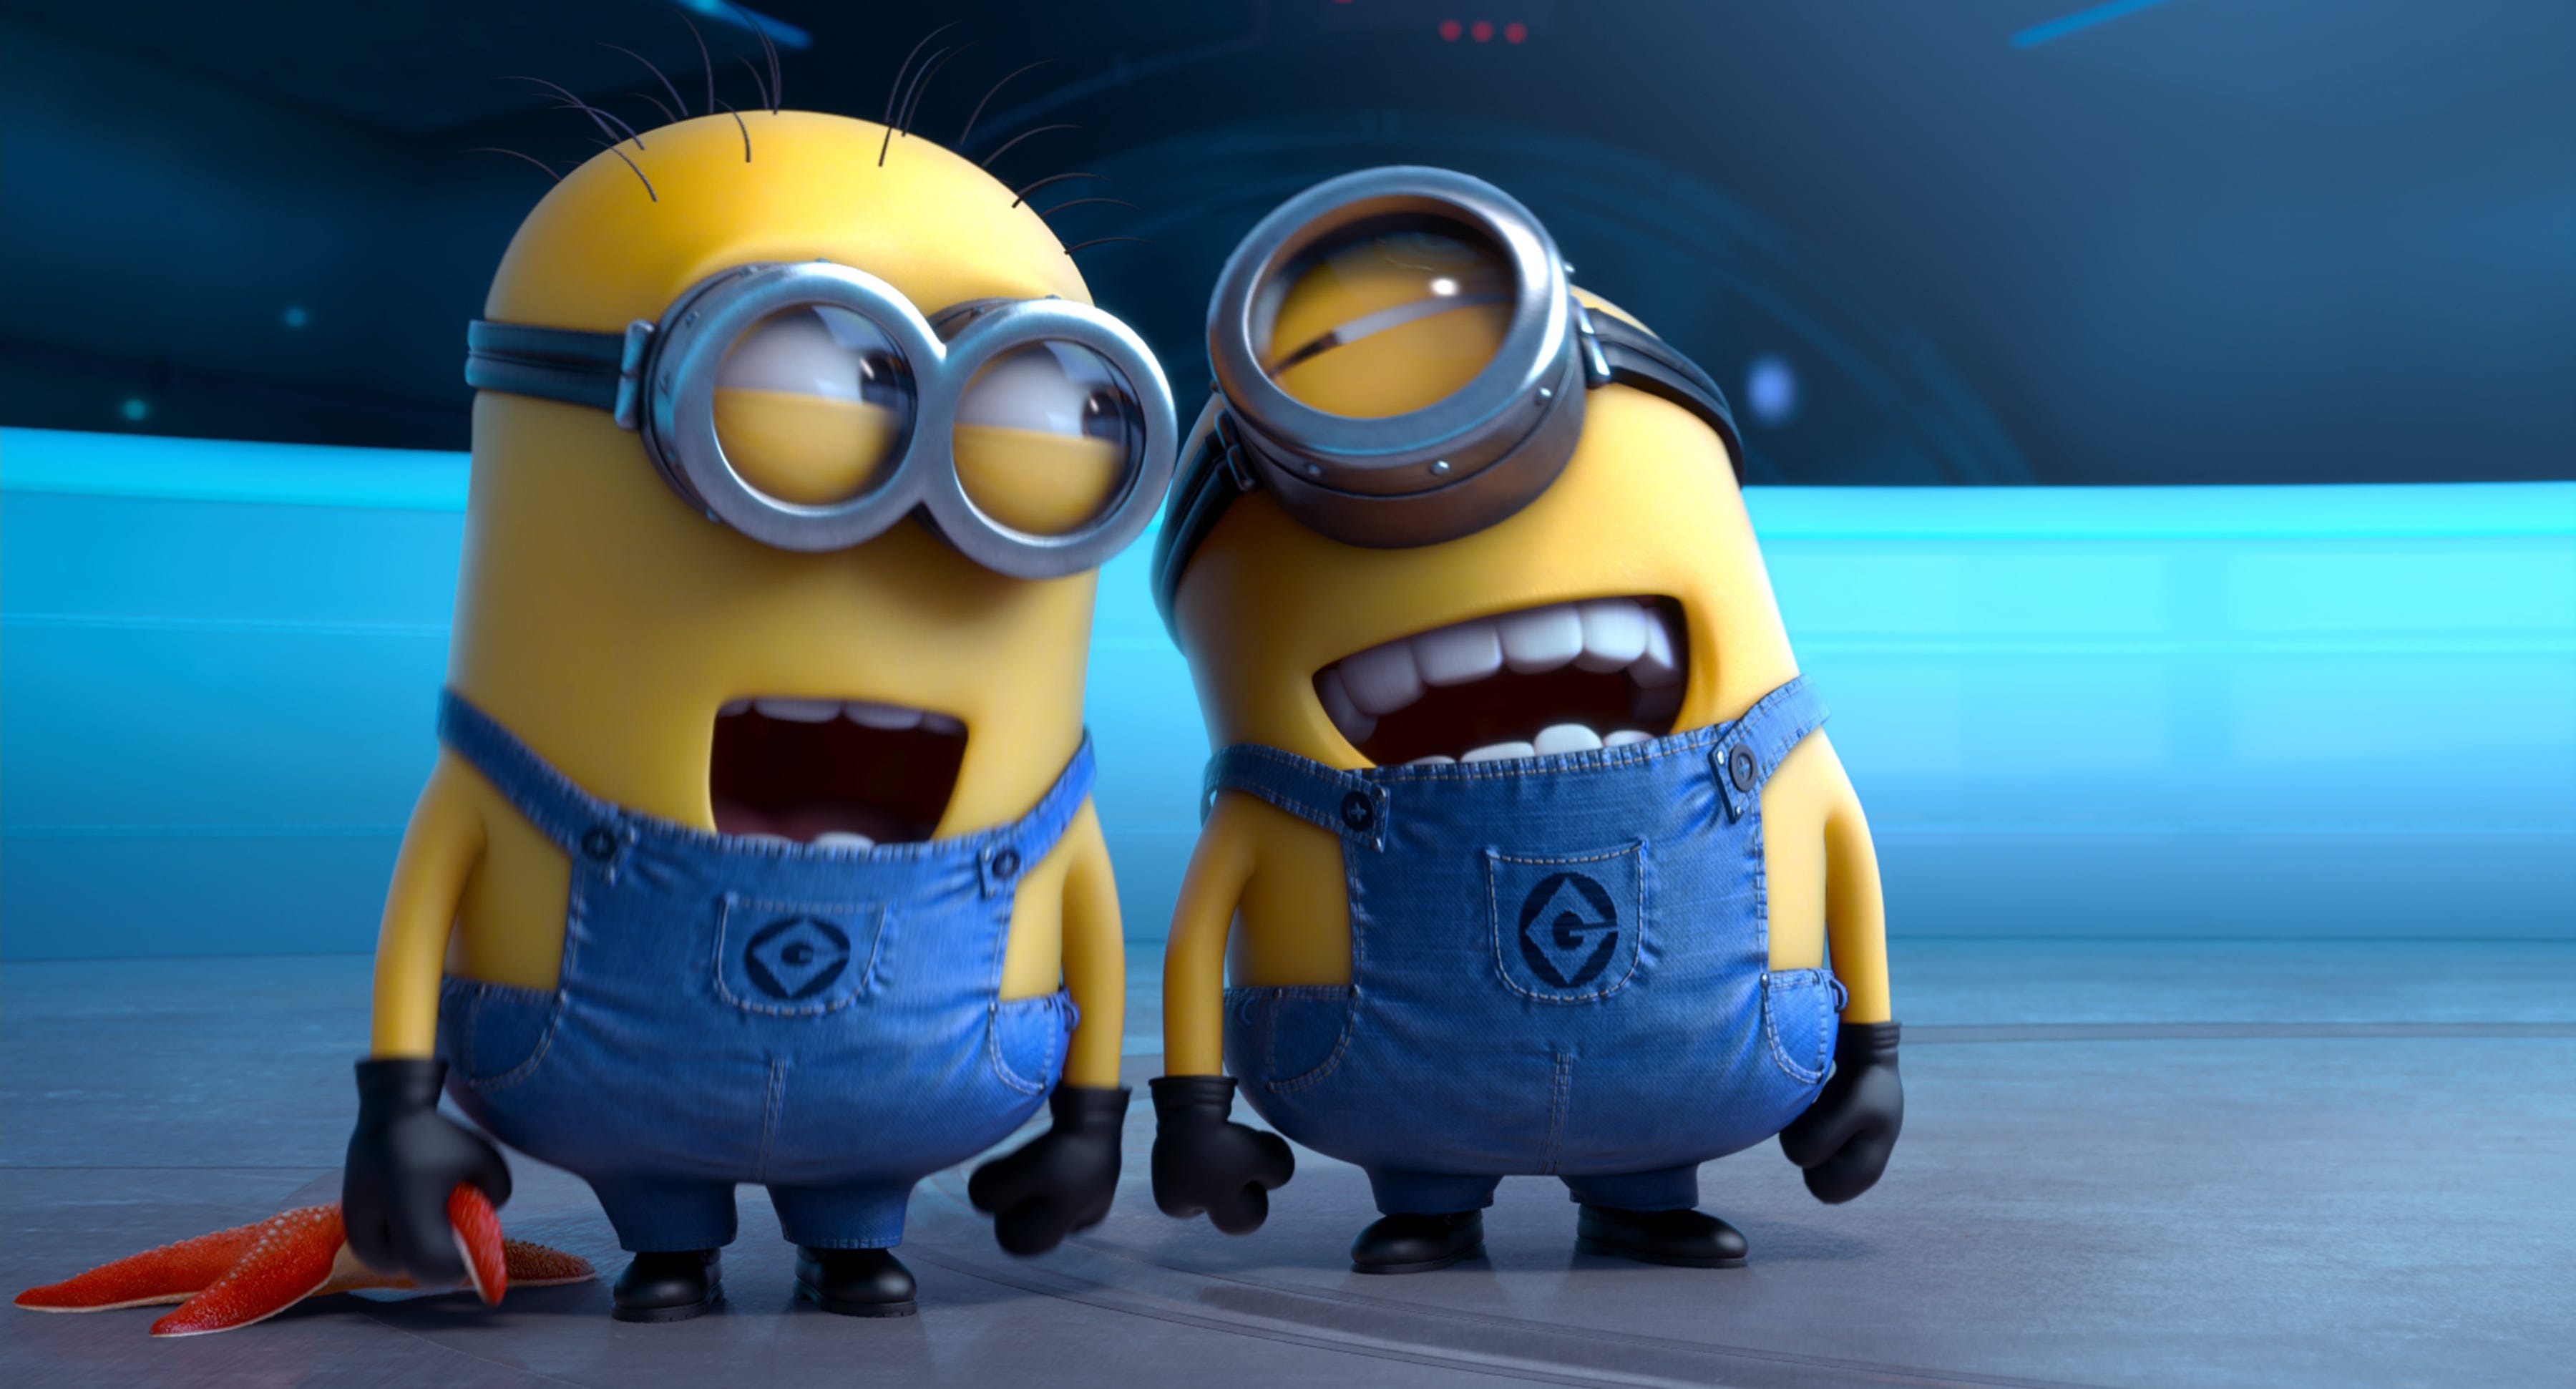 With 'Despicable Me ' fans again go bananas over Gru's minions